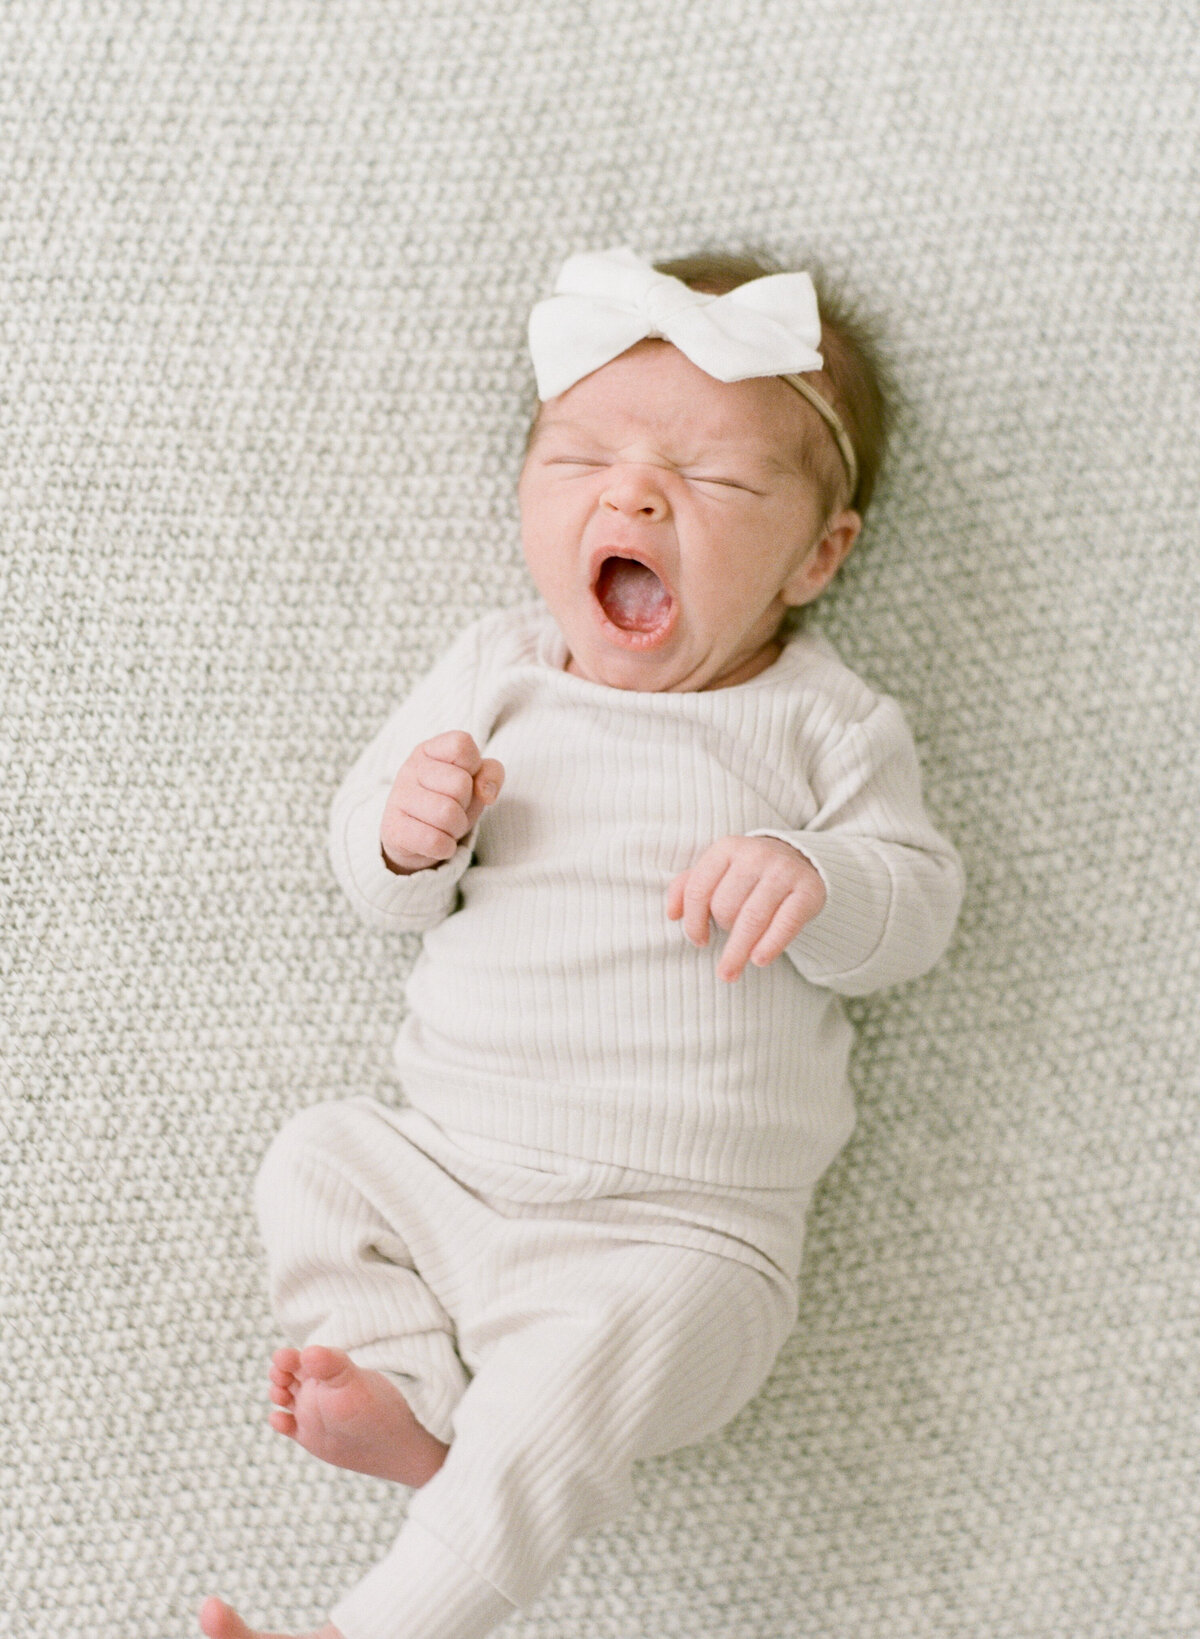 Baby yawns during her newborn session in Raleigh. Photographed by Raleigh Newborn Photographer A.J. Dunlap Photography.